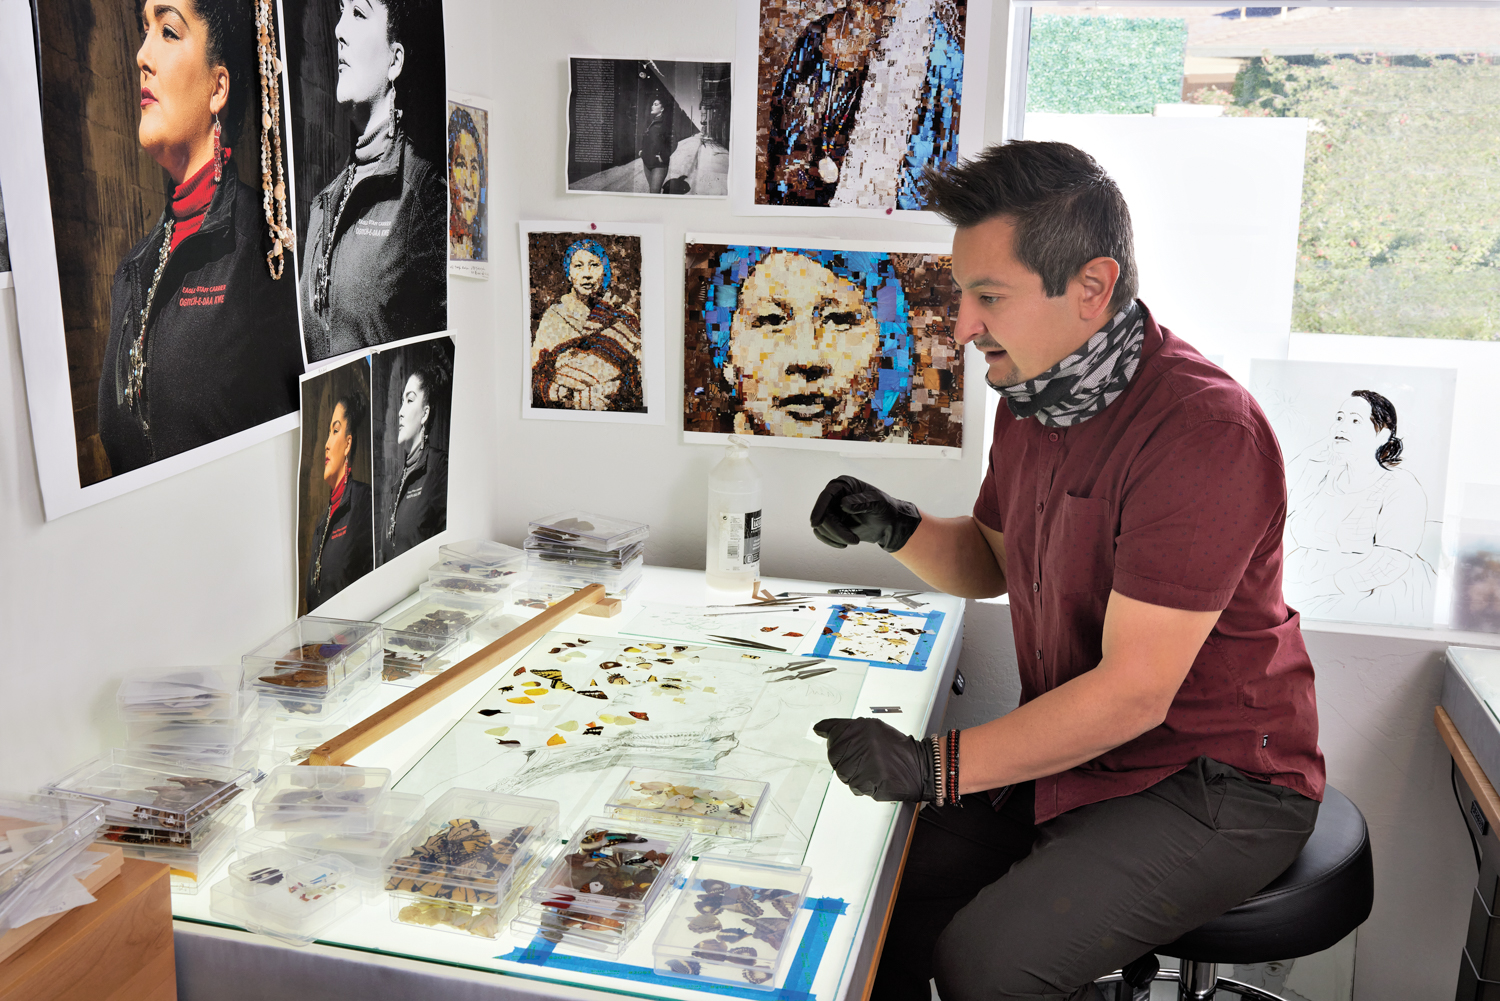 Artist Benjamin Timpson sitting at a table surrounded by images of women and butterfly wings